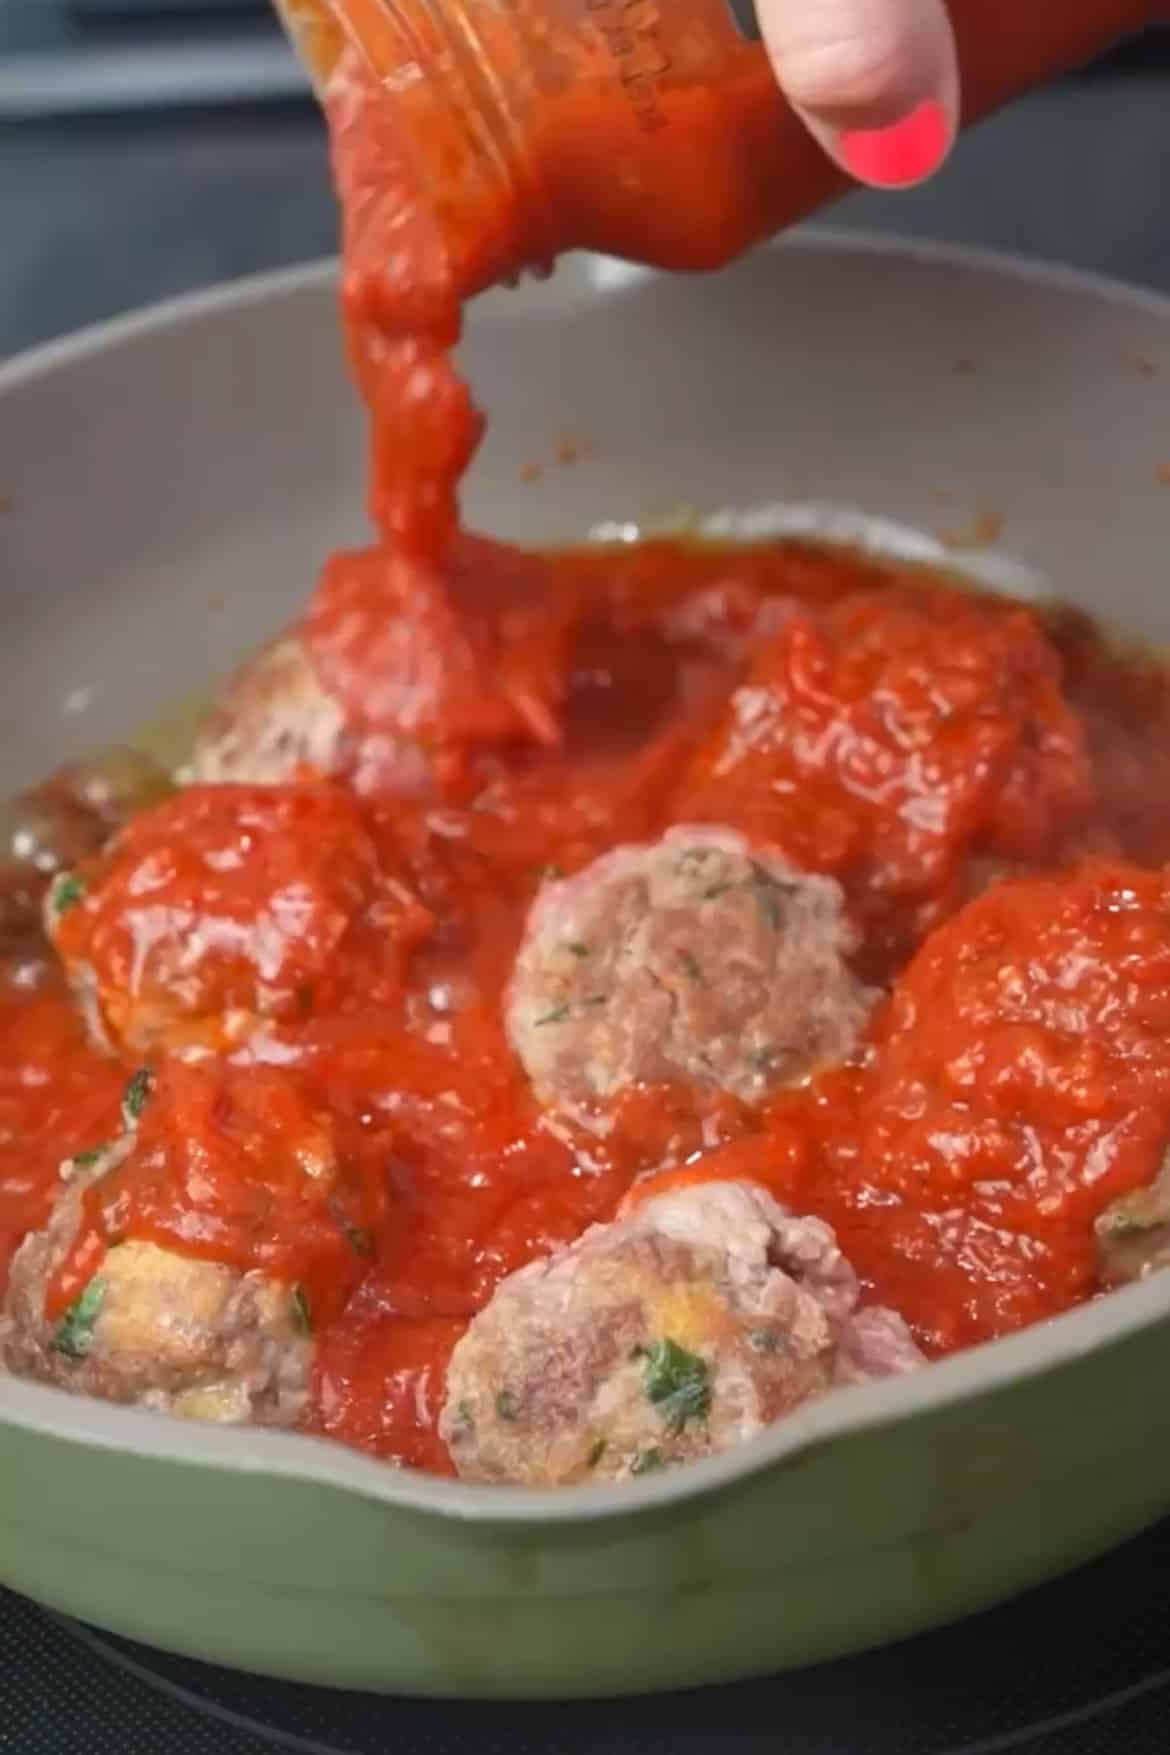 Cook the Meatballs: Heat a large skillet or frying pan over medium-high heat. Add a bit of olive oil to the pan to prevent sticking. Place the meatballs in the hot pan and cook, turning them occasionally, until they are browned on all sides and browned, about 5 minutes on each side. Lower the heat and pour the sauce over the meatballs. Cover and cook for about 10-15 minutes.